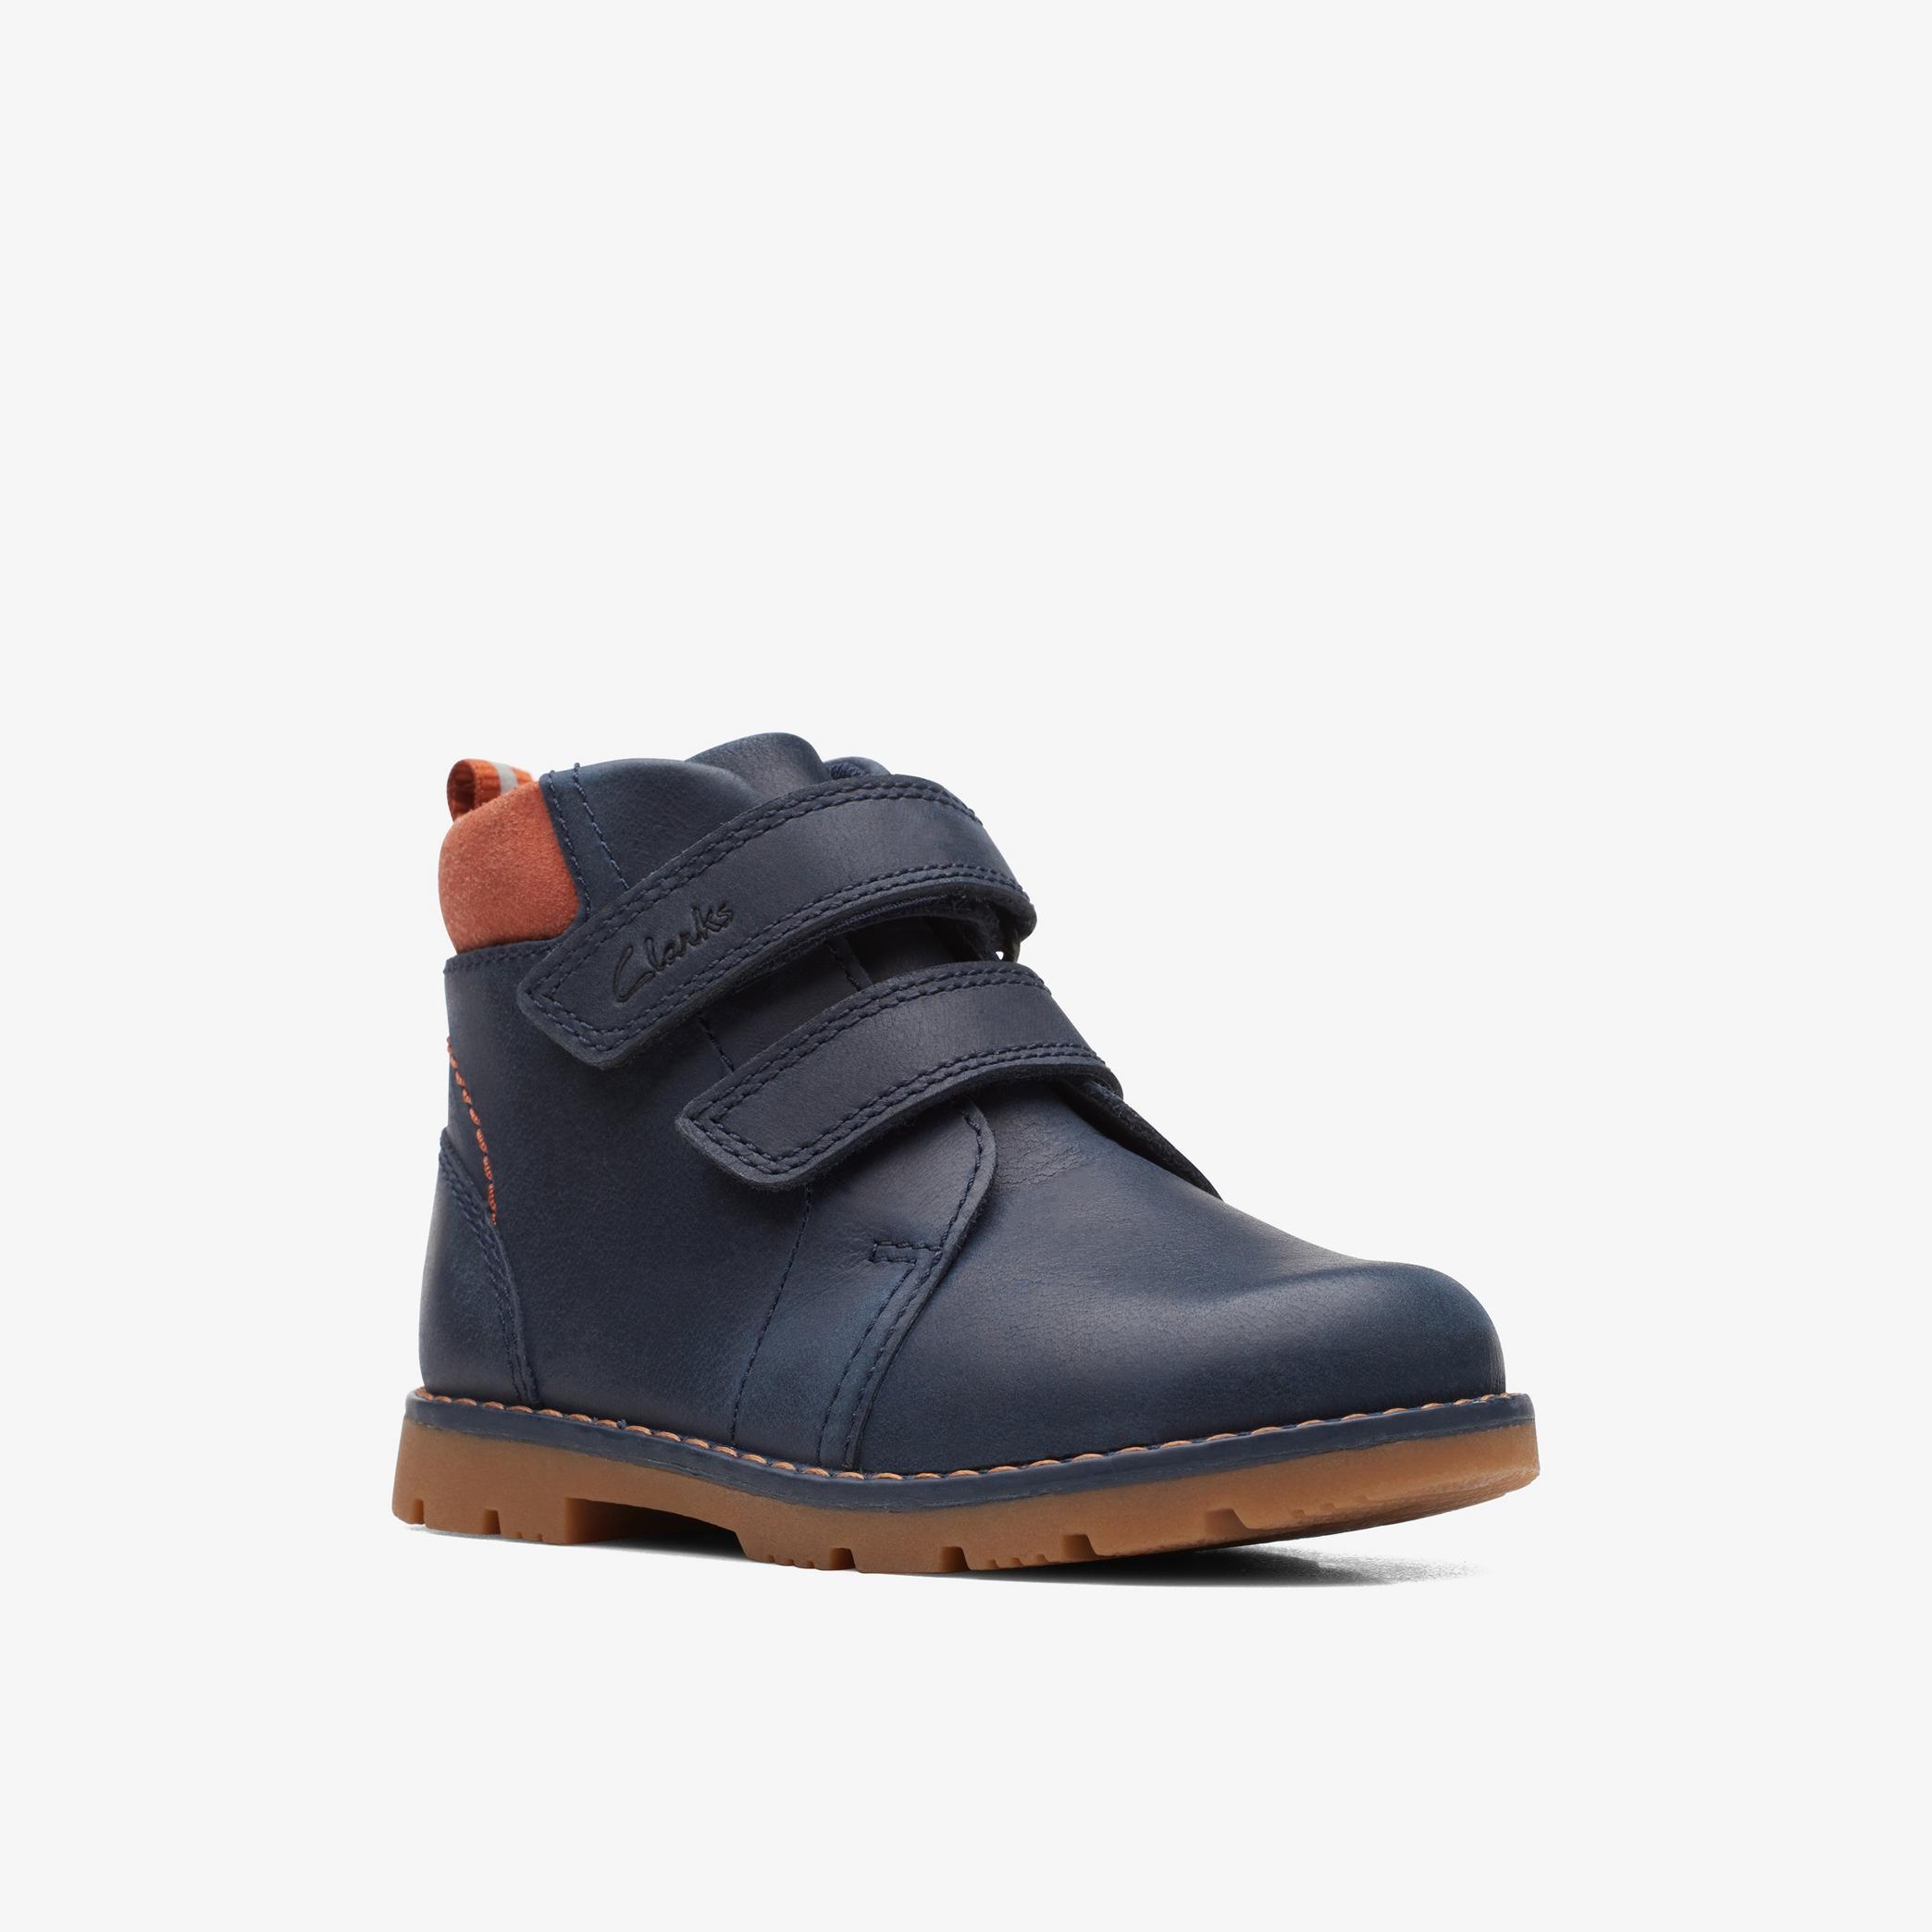 Heath Strap Toddler Navy Ankle Boots, view 3 of 6